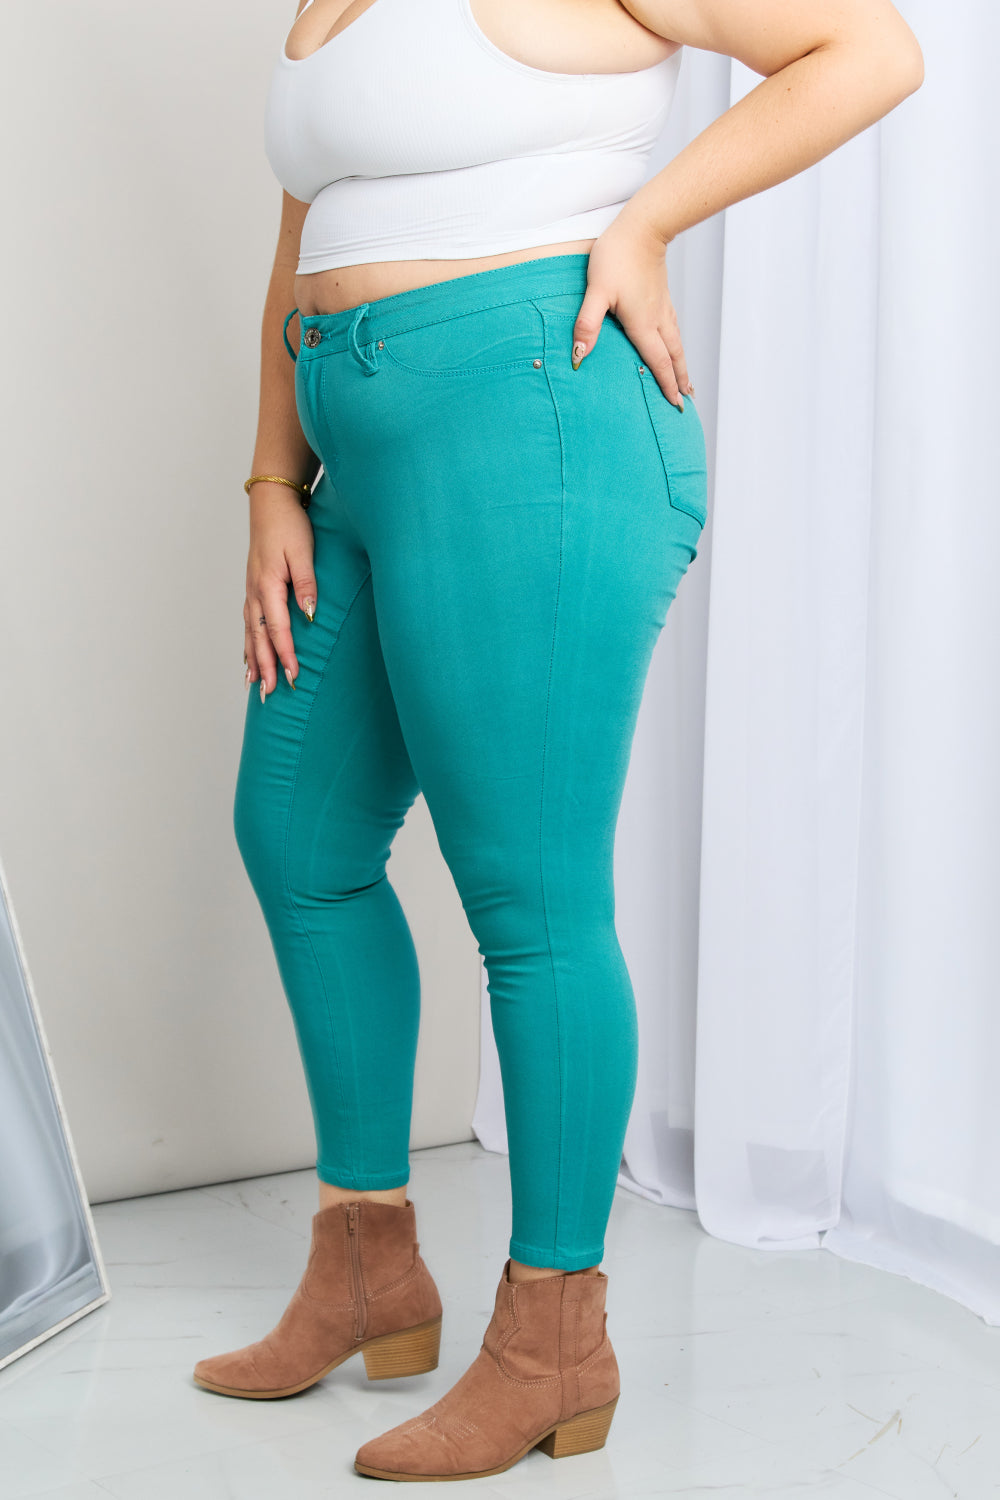 - YMI Jeanswear Kate Hyper-Stretch Full Size Mid-Rise Skinny Jeans in Sea Green - Ships from The US - womens jeans at TFC&H Co.